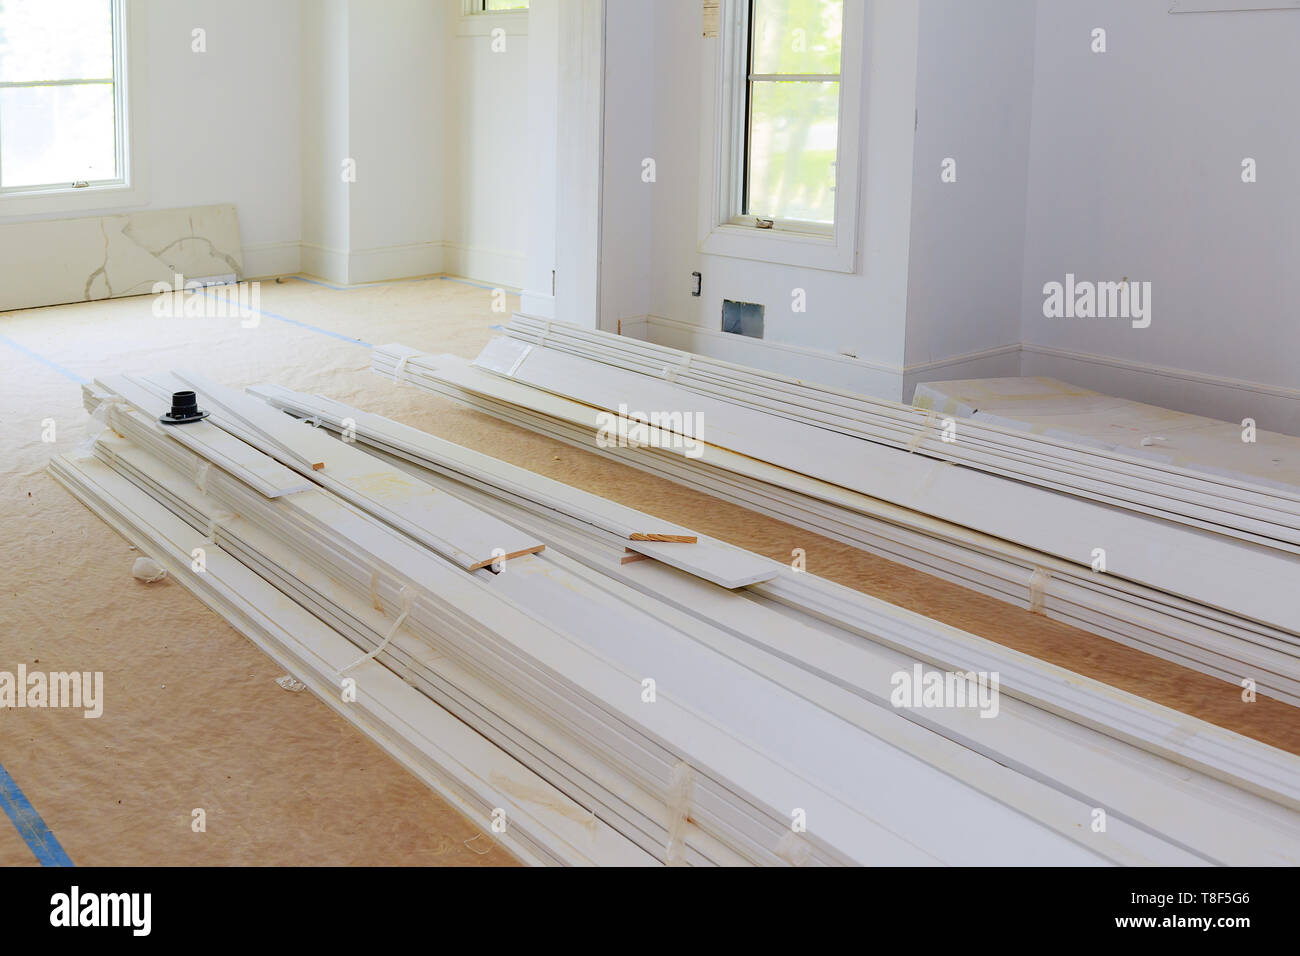 Interior construction of housing project with molding installed Stock Photo